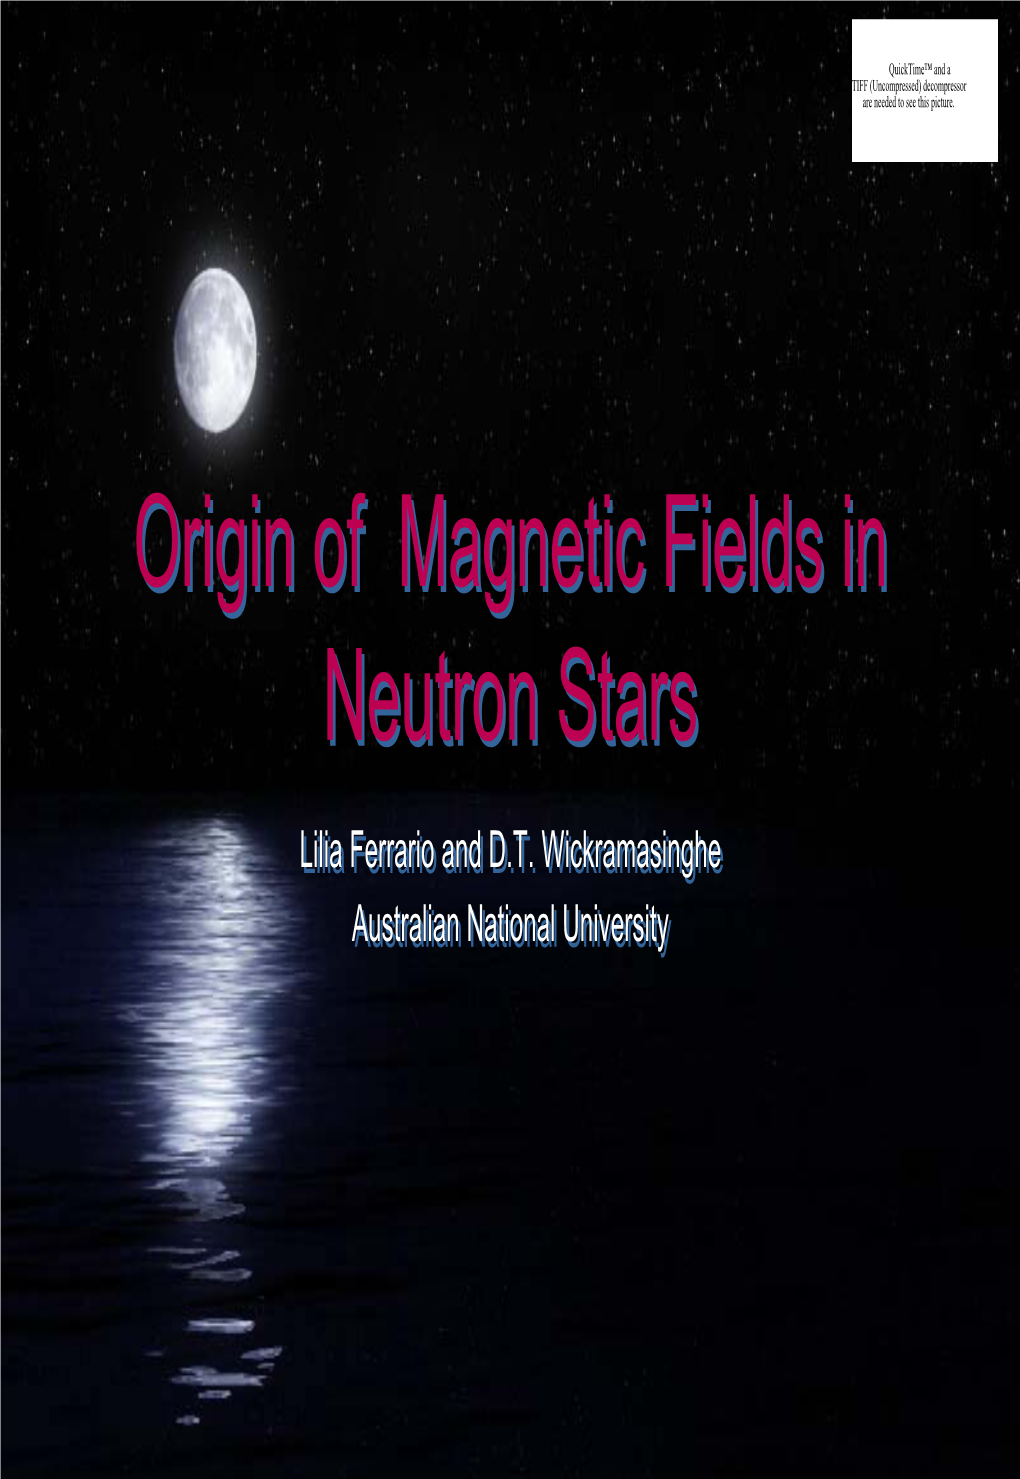 Magnetic Fields in Compact Stars